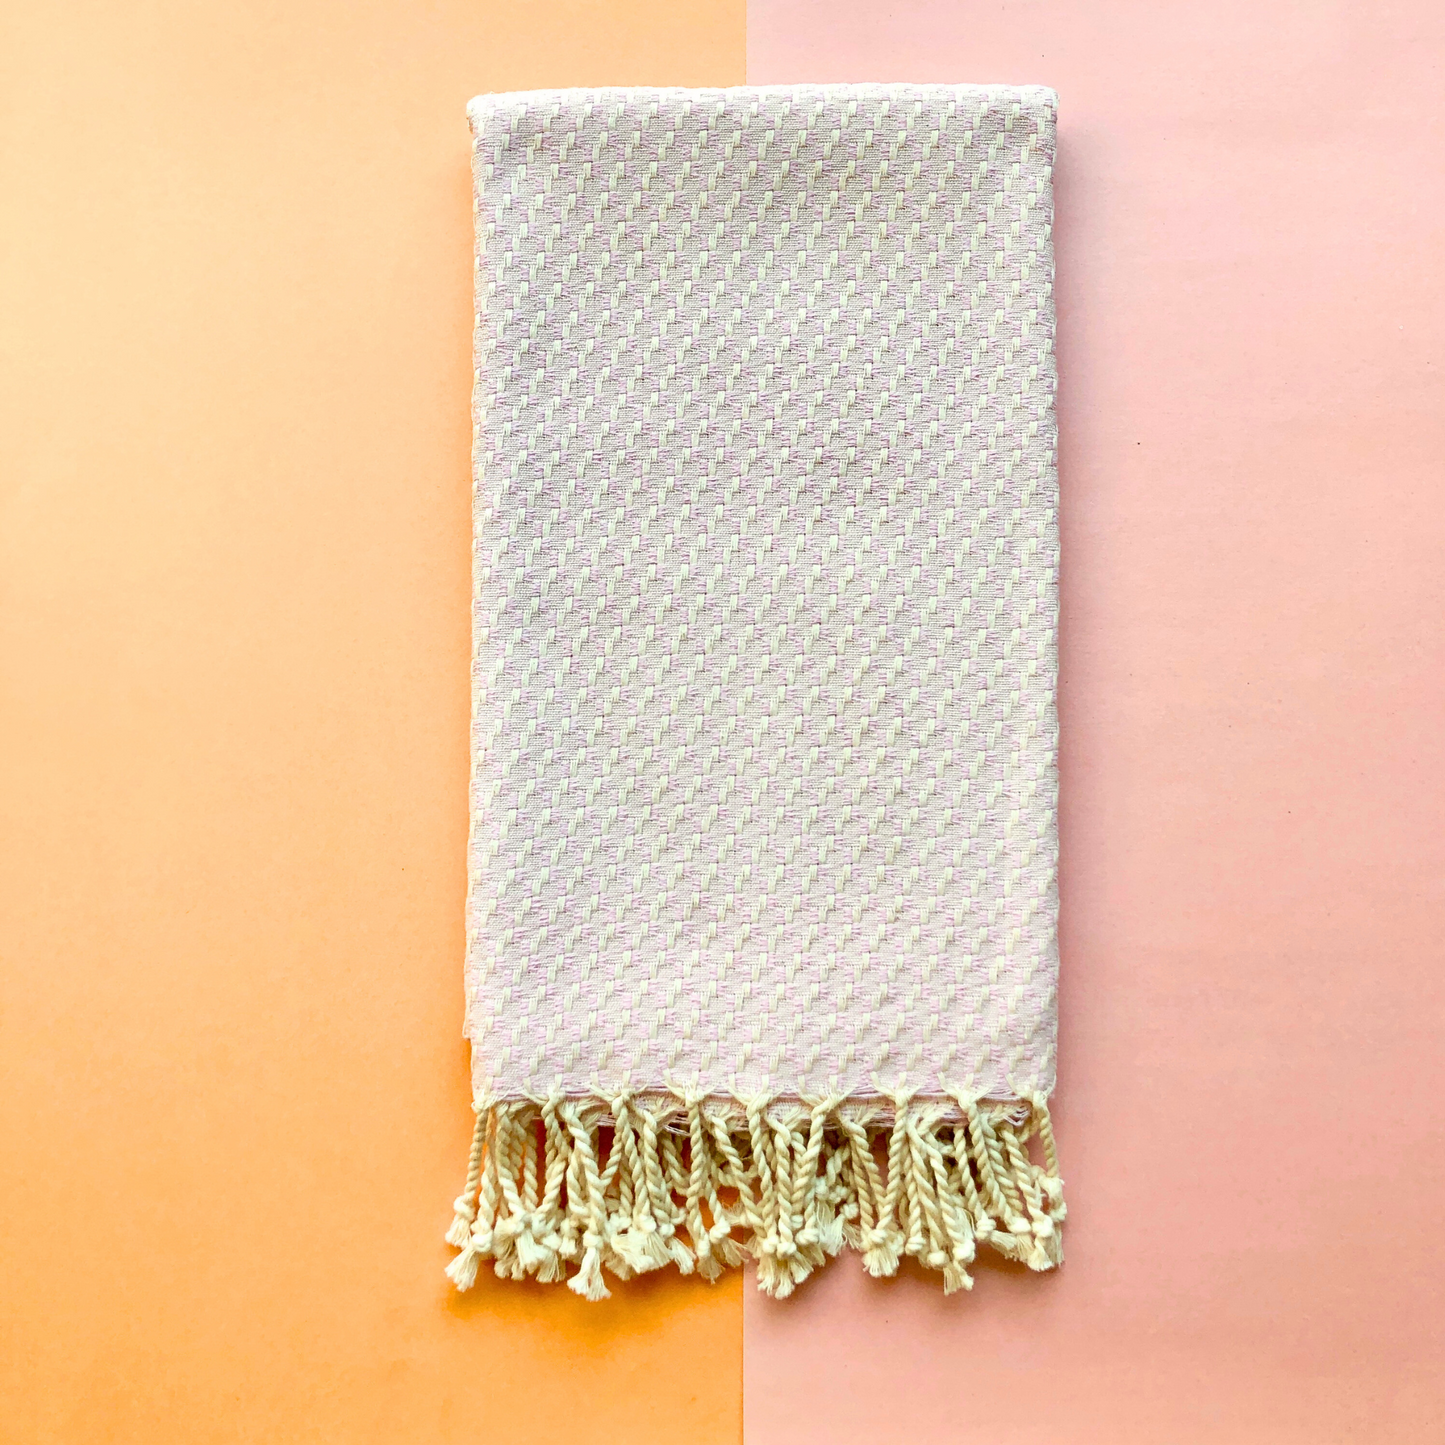 Folded ISTANBUL Throw on orange and pink background